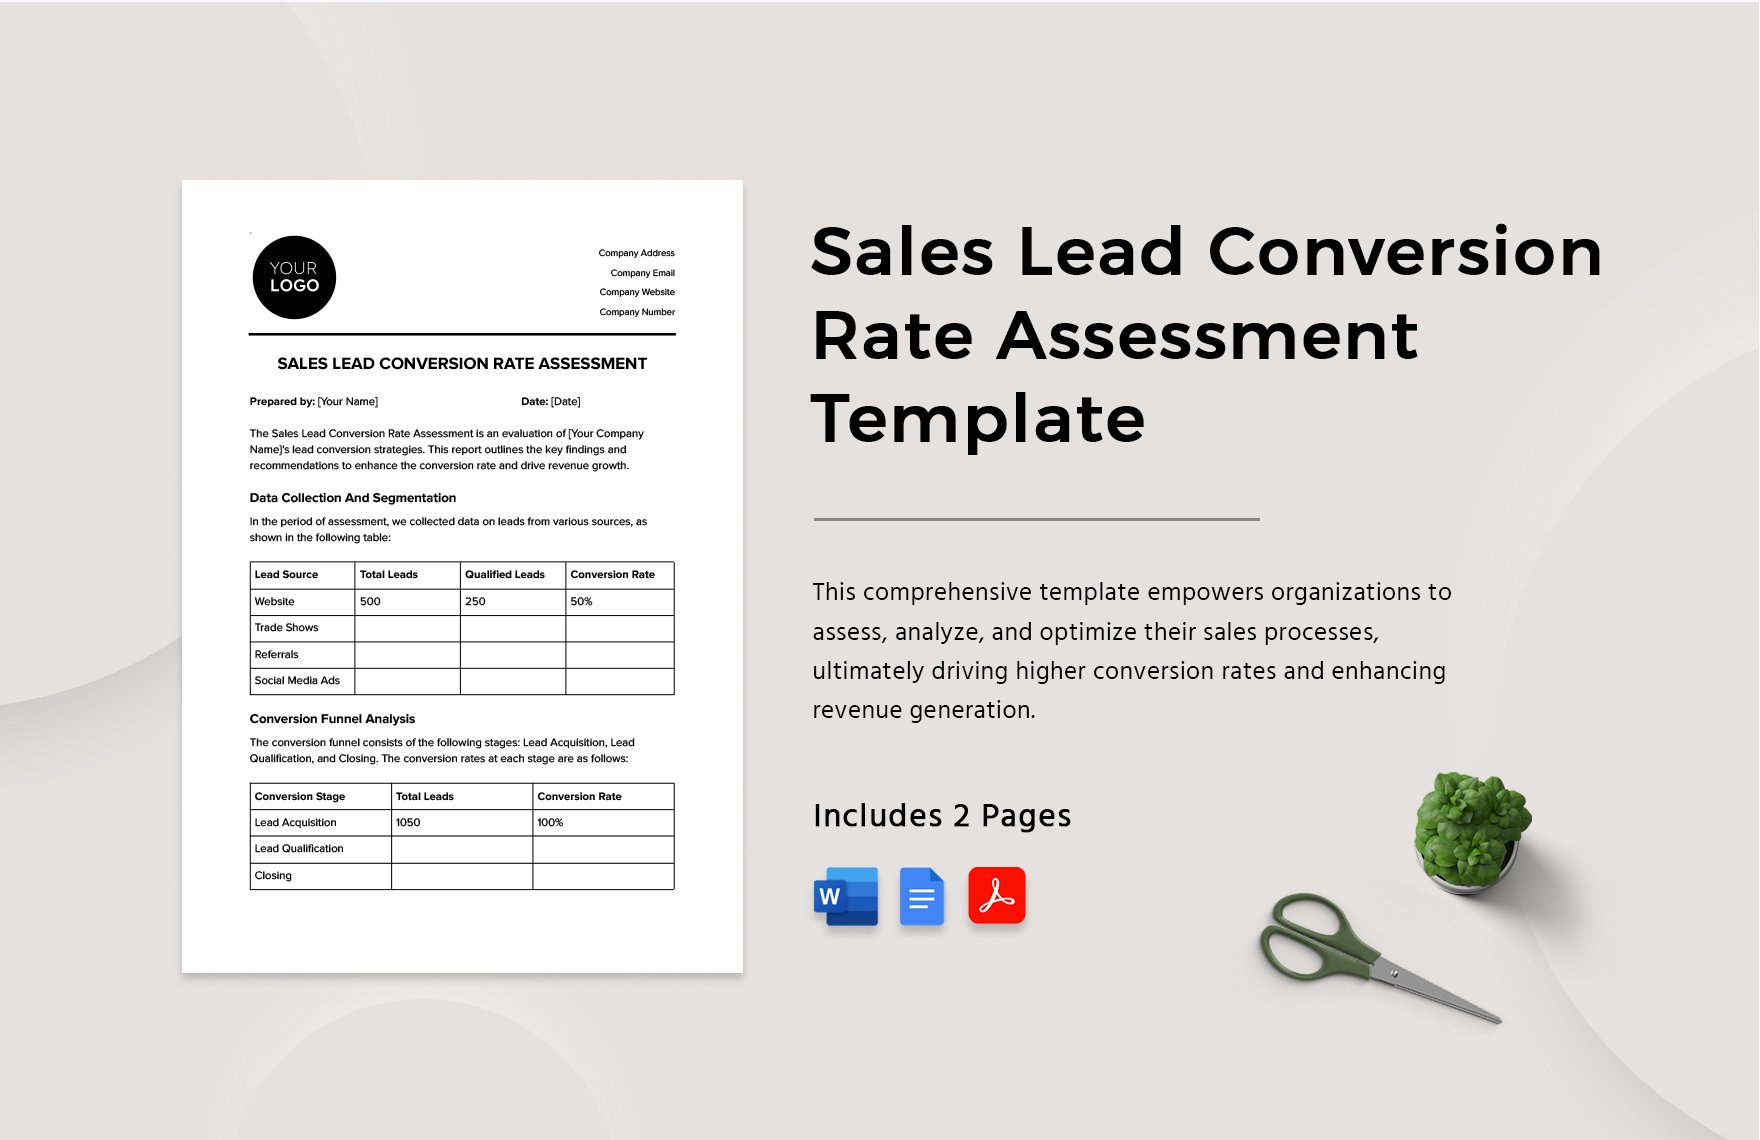 Sales Lead Conversion Rate Assessment Template in Word, Google Docs, PDF